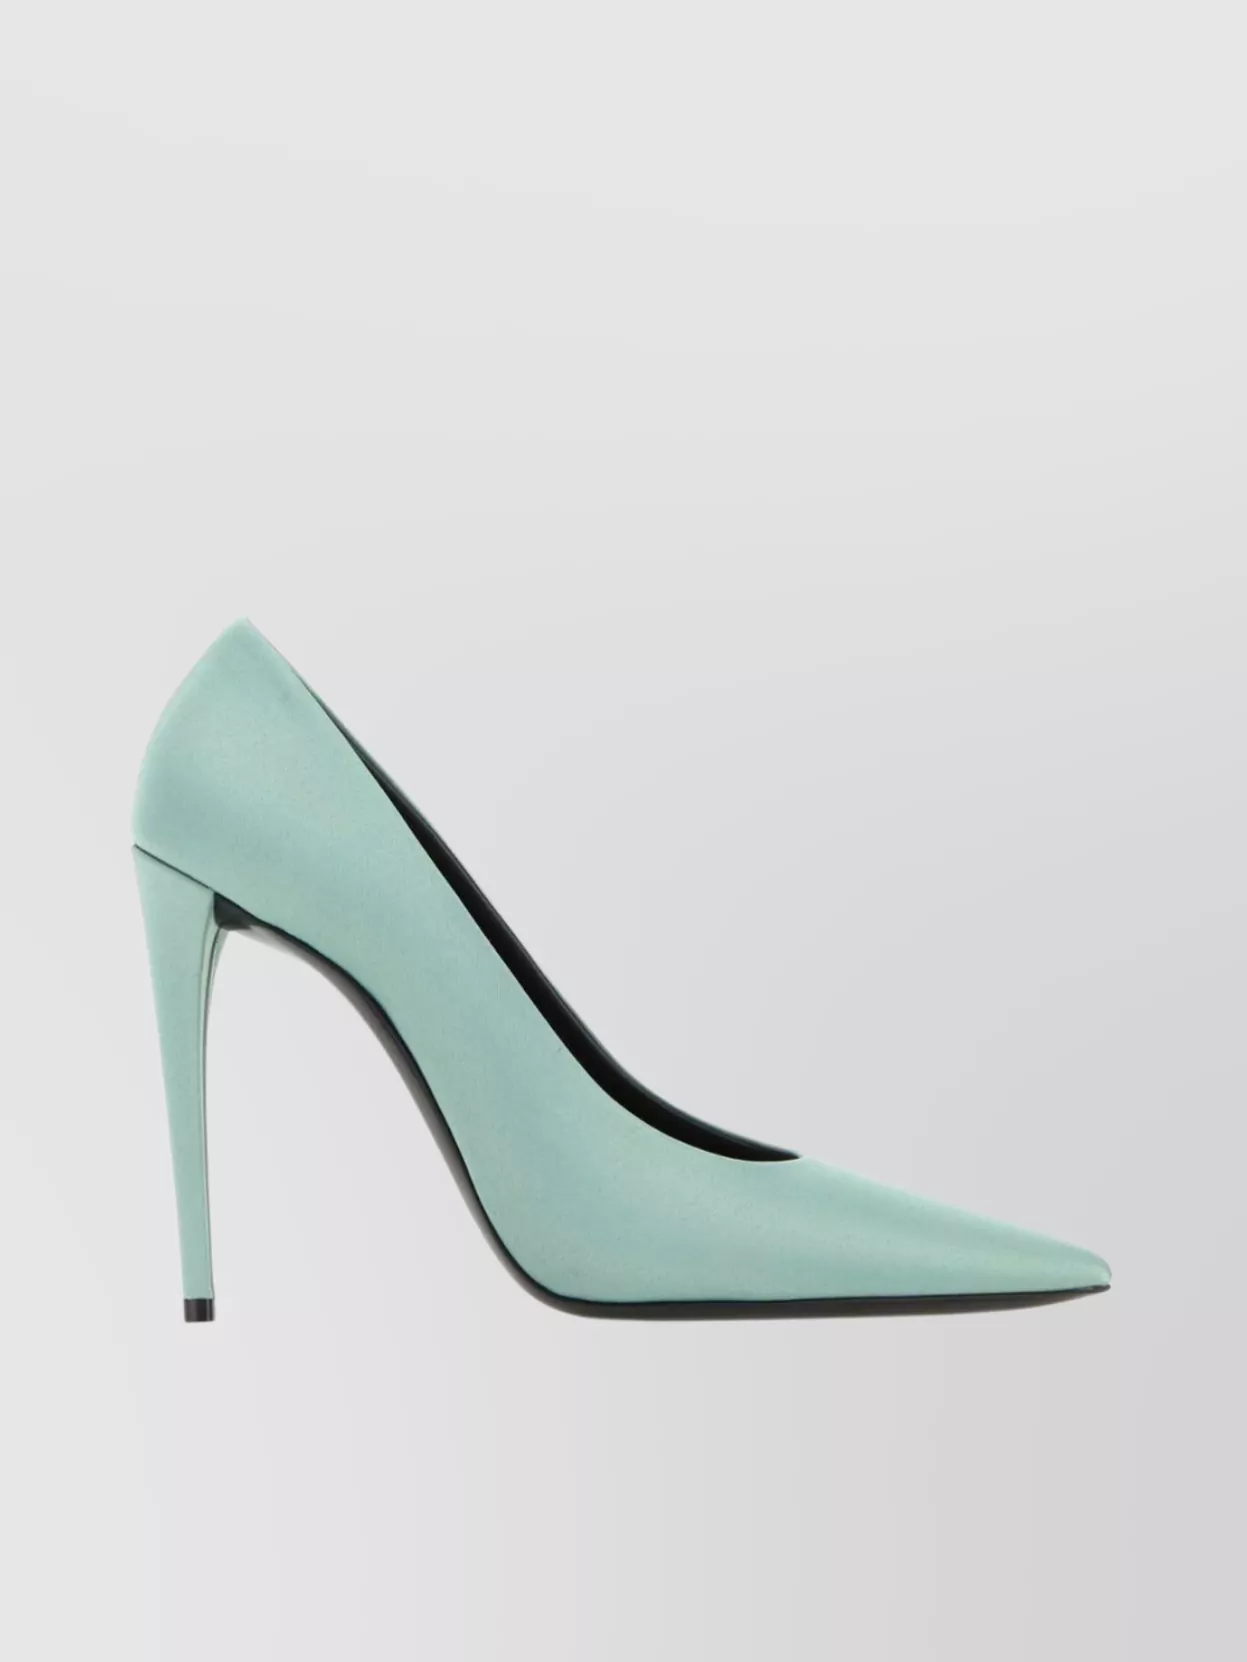 Saint Laurent Satin Monceau Pumps Featuring Pointed Toe In Green